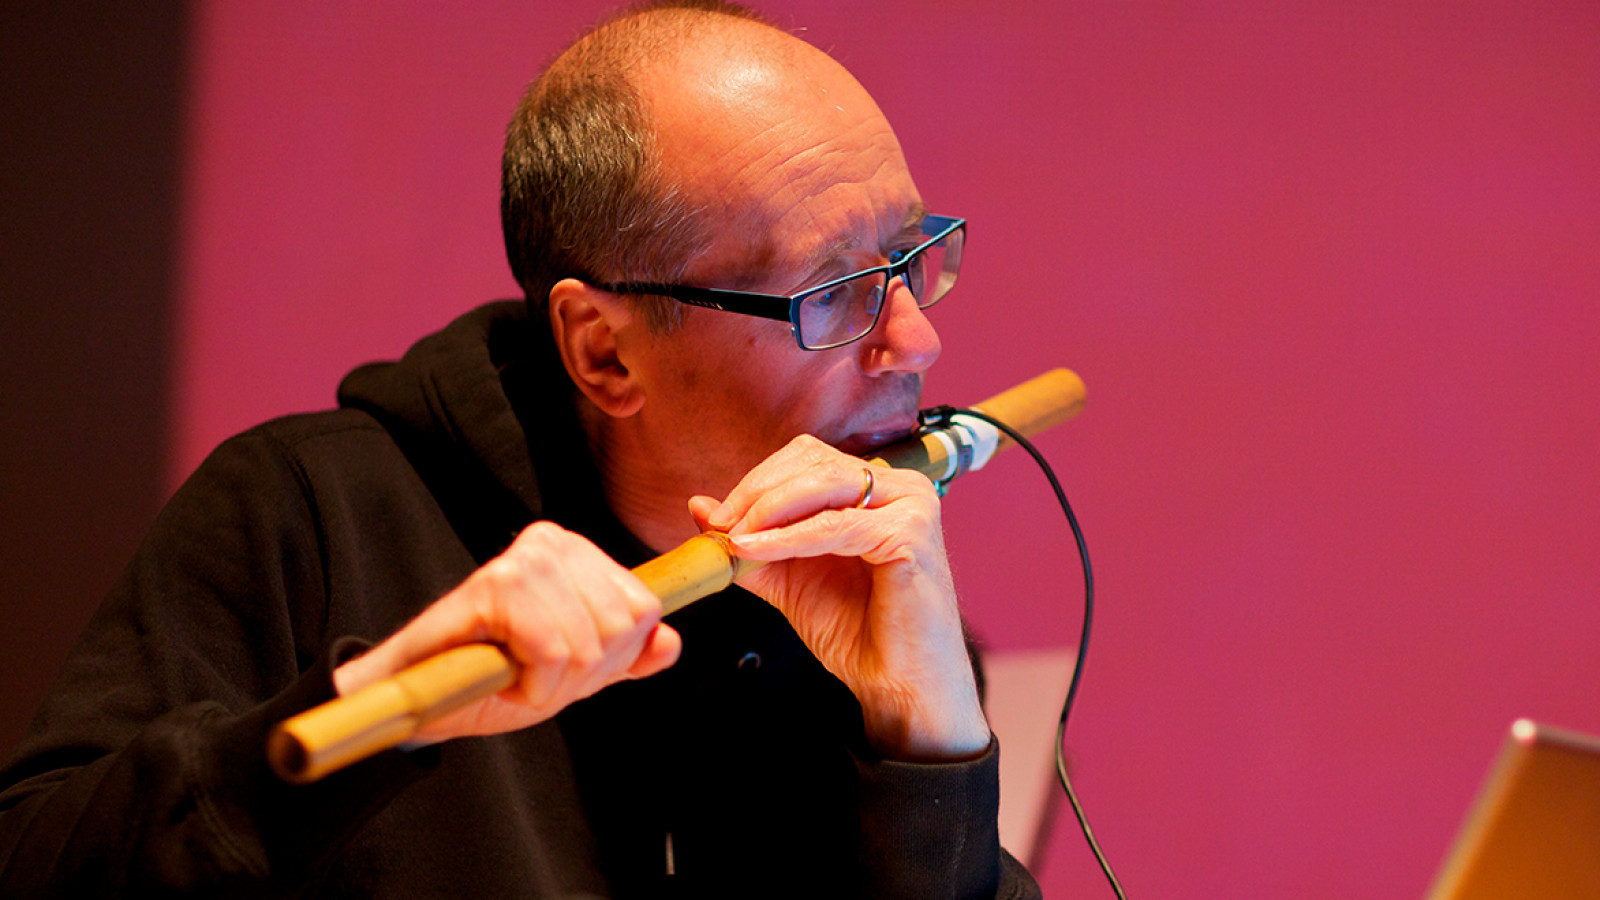 A conversation with David Toop